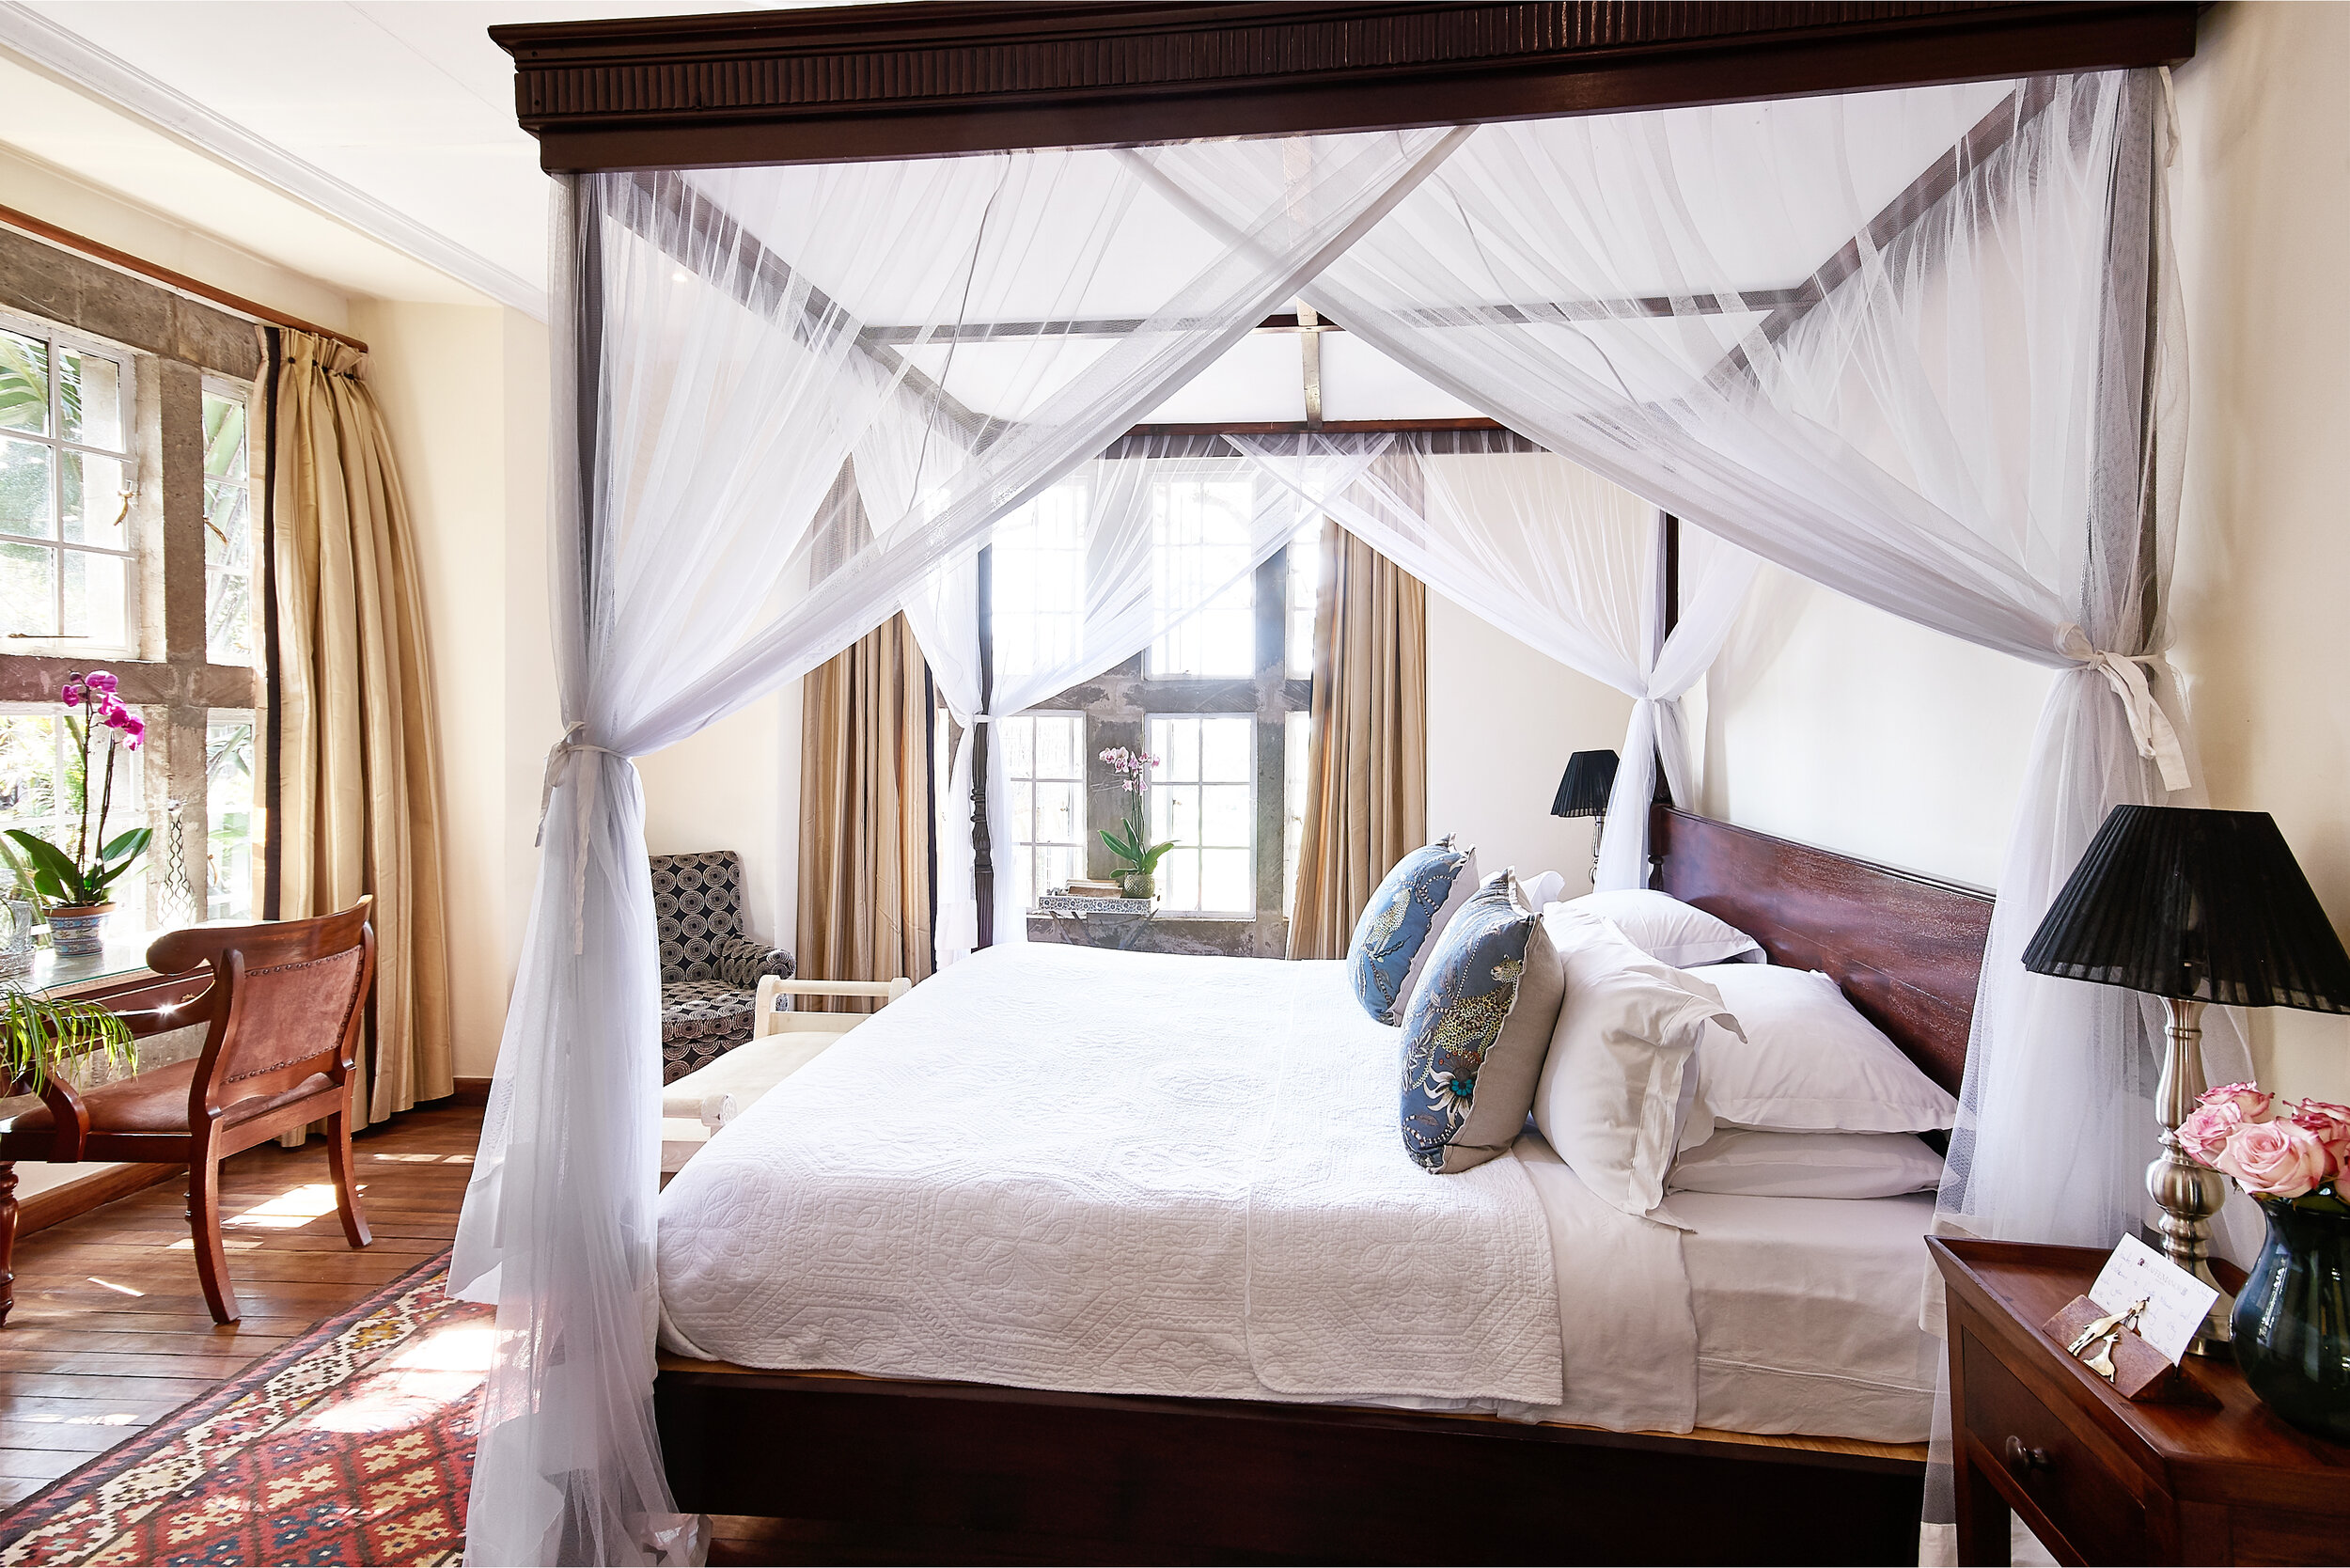   One of the guest bedrooms at Giraffe Manor (photo credit: Janine Cifelli Representation)  